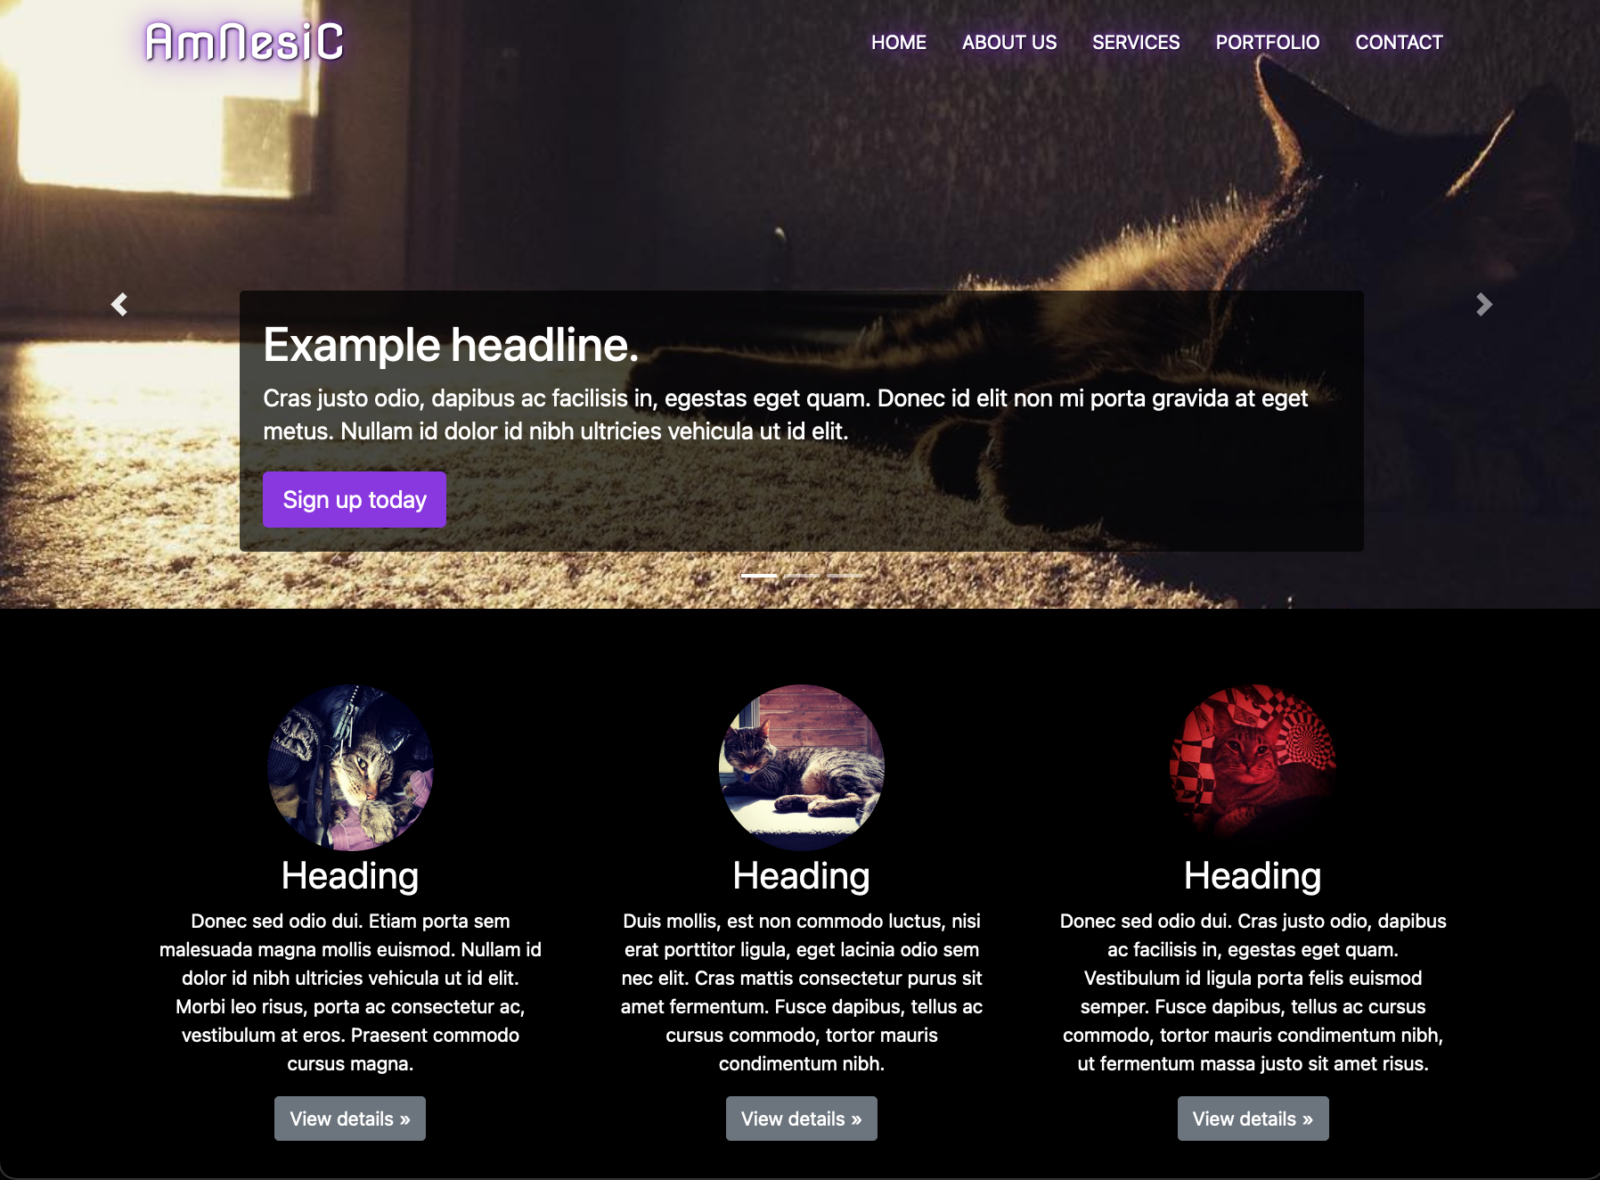 A screenshot showing the AmNesiC HTML template